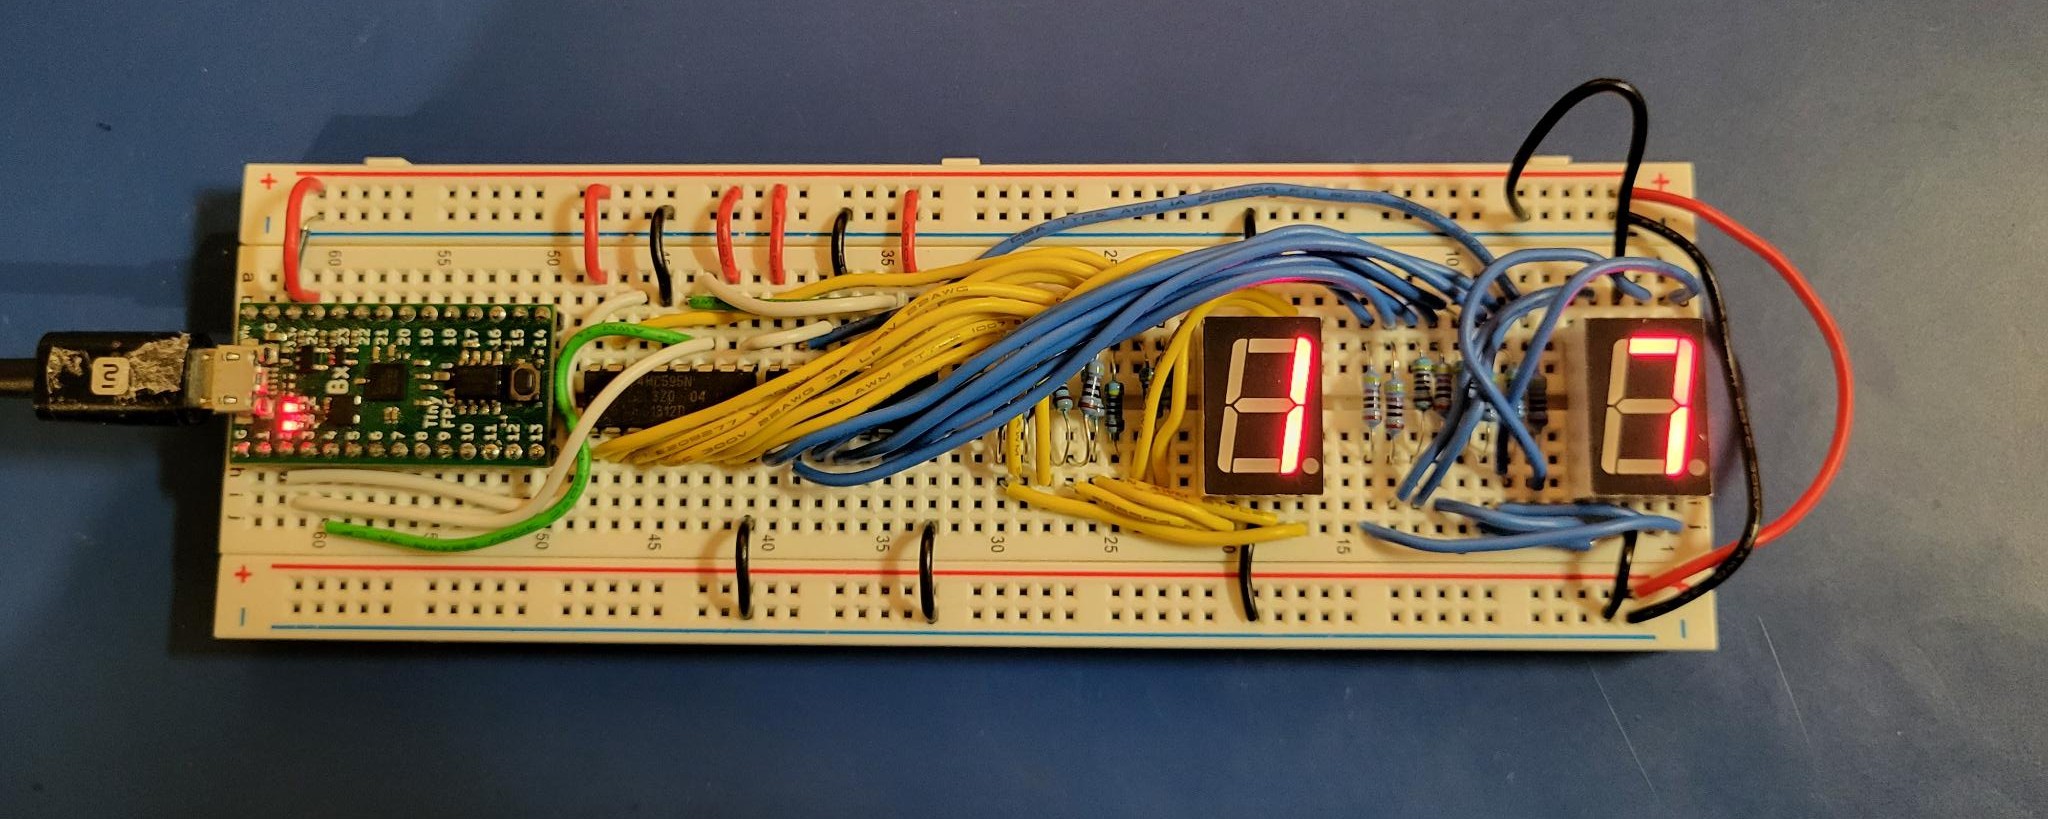 Daisy-chained Seven Segment Display on Actual Breadboard